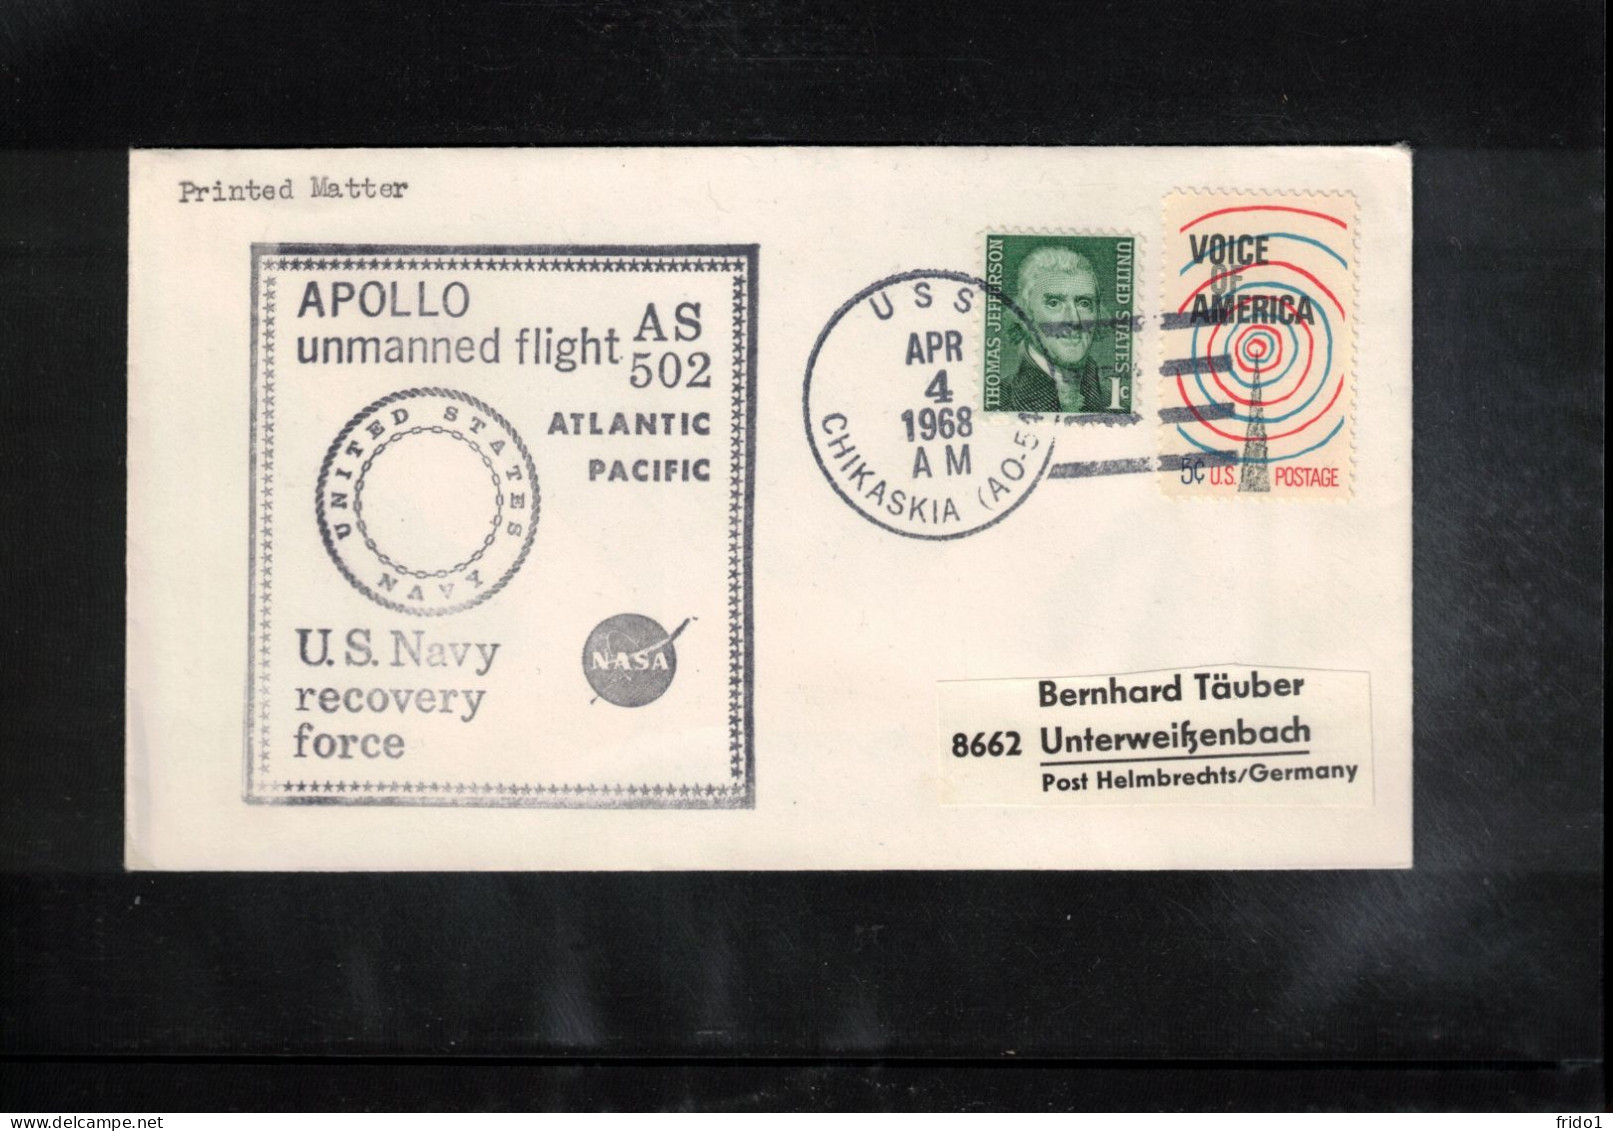 USA 1968 Space / Weltraum Apollo Unmanned Flight AS 502 - US Navy Recovery Force Ship USS Chikaskia Interesting Cover - Stati Uniti